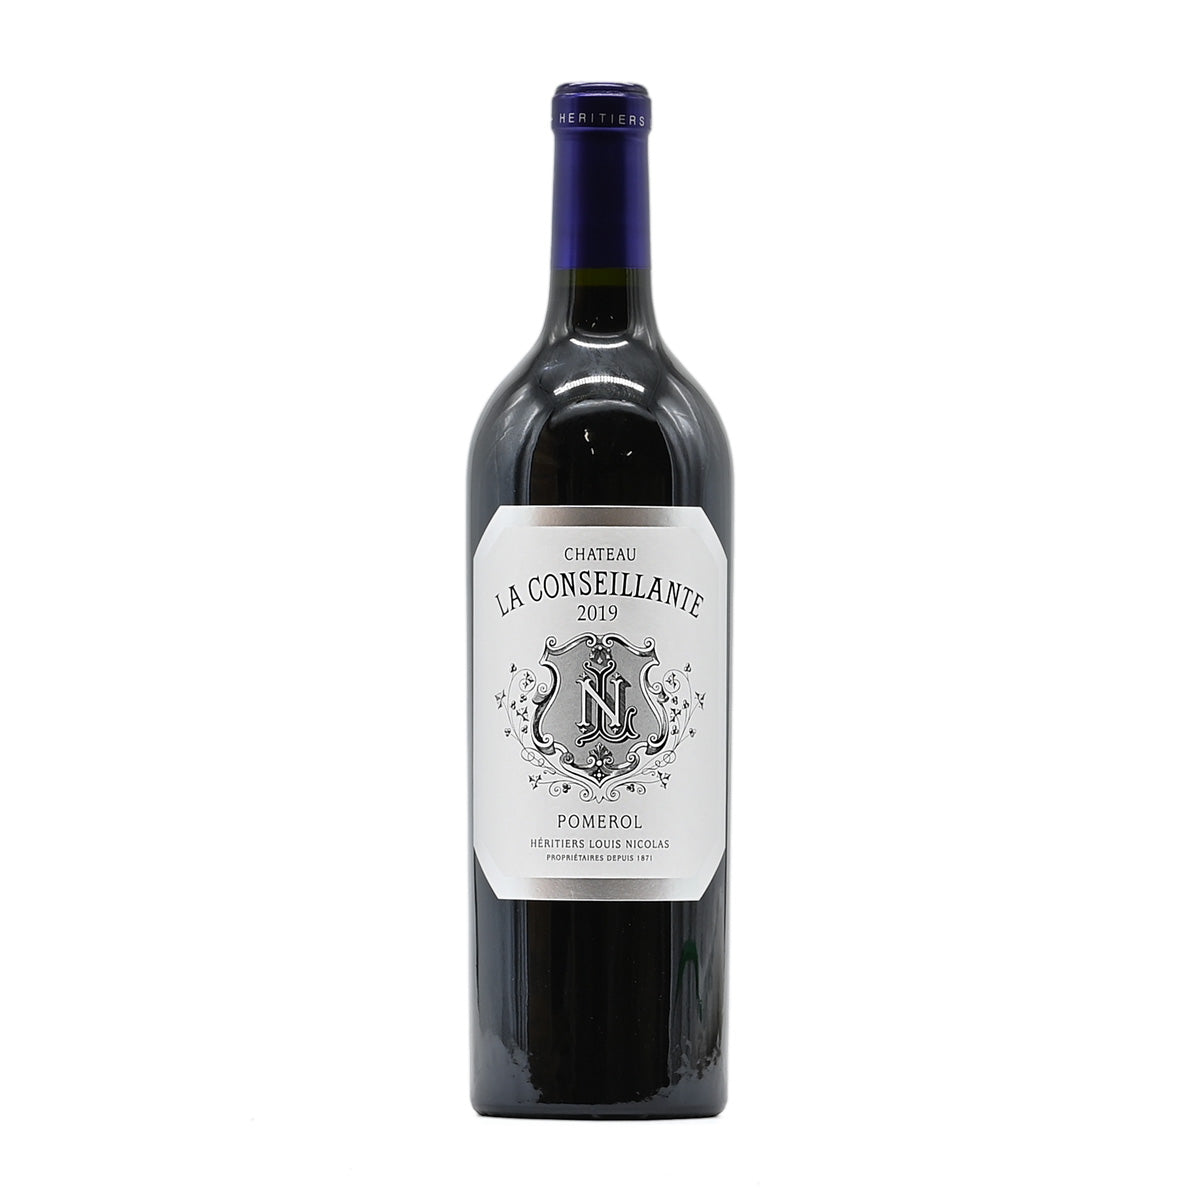 La Conseillante 2019, 750ml French red wine, made from a blend of Merlot, Cabernet Franc, from Pomerol, Bordeaux, France – GDV Fine Wines, Hong Kong